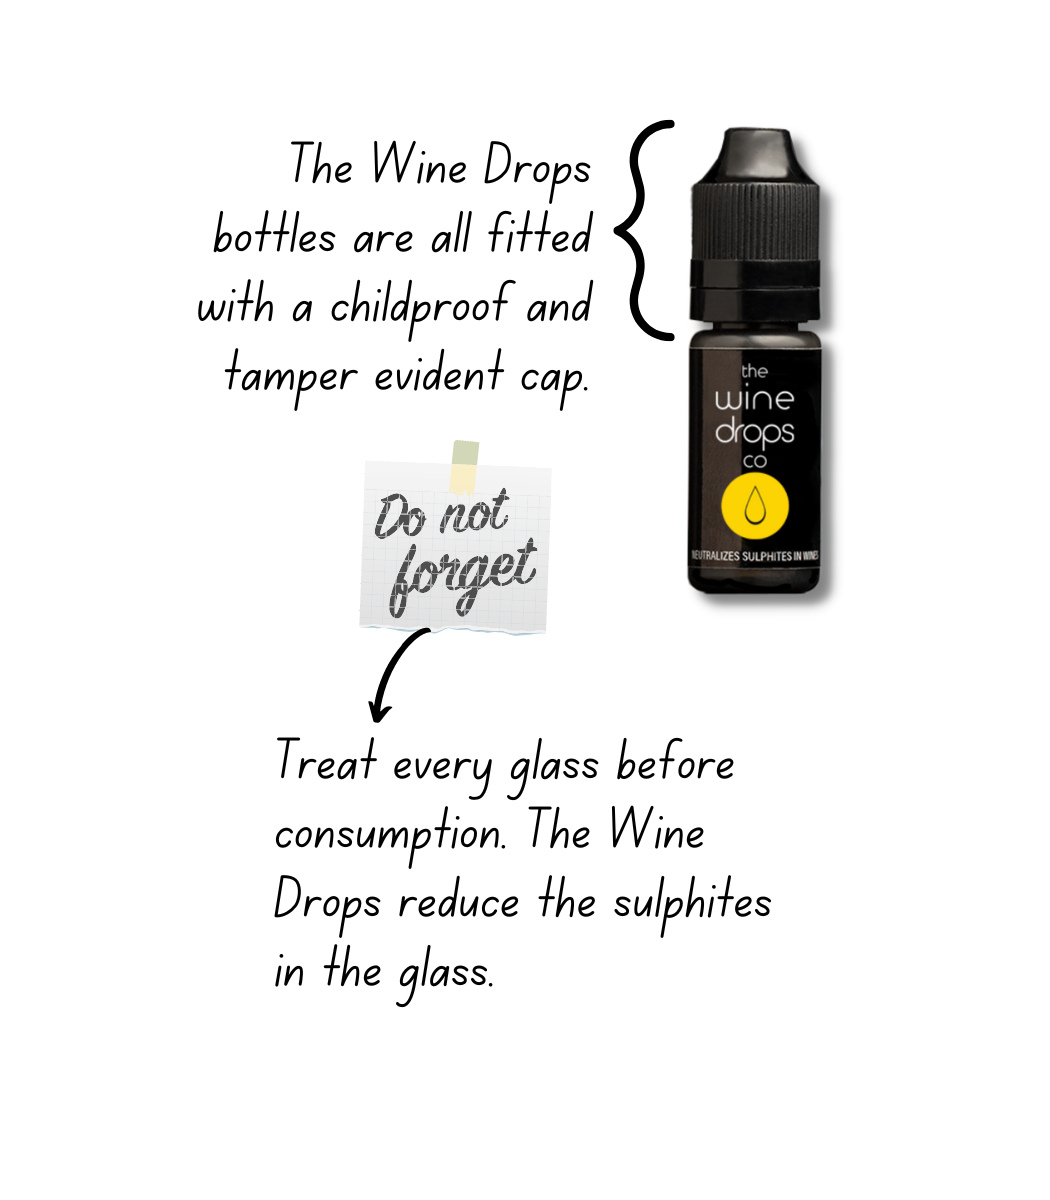 The Wine Drops - Unique product features